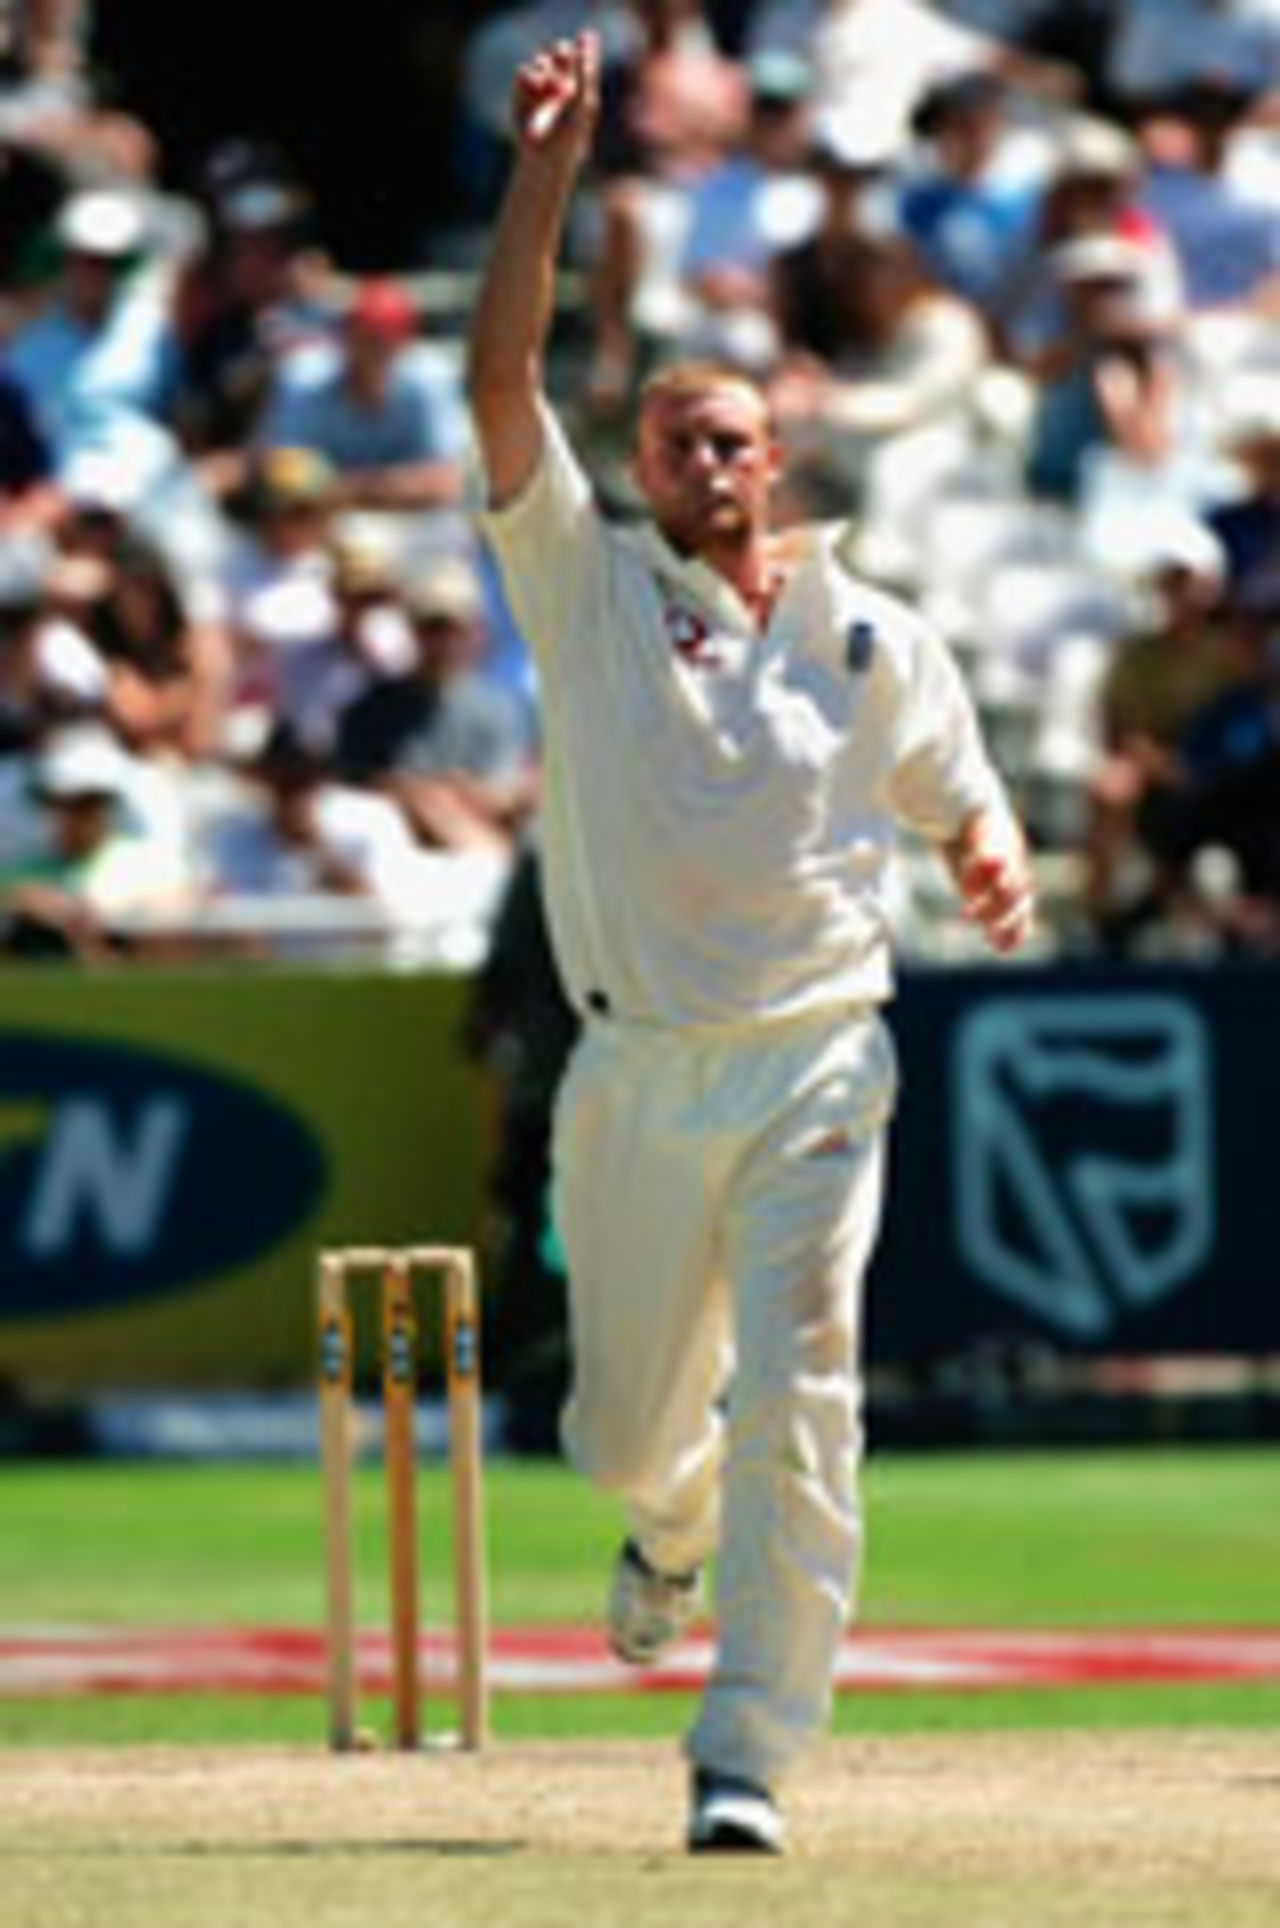 Andrew Flintoff claims Nicky Boje and SA are all out, South Africa v England, 3rd Test, Cape Town, 2nd day, January 3, 2005